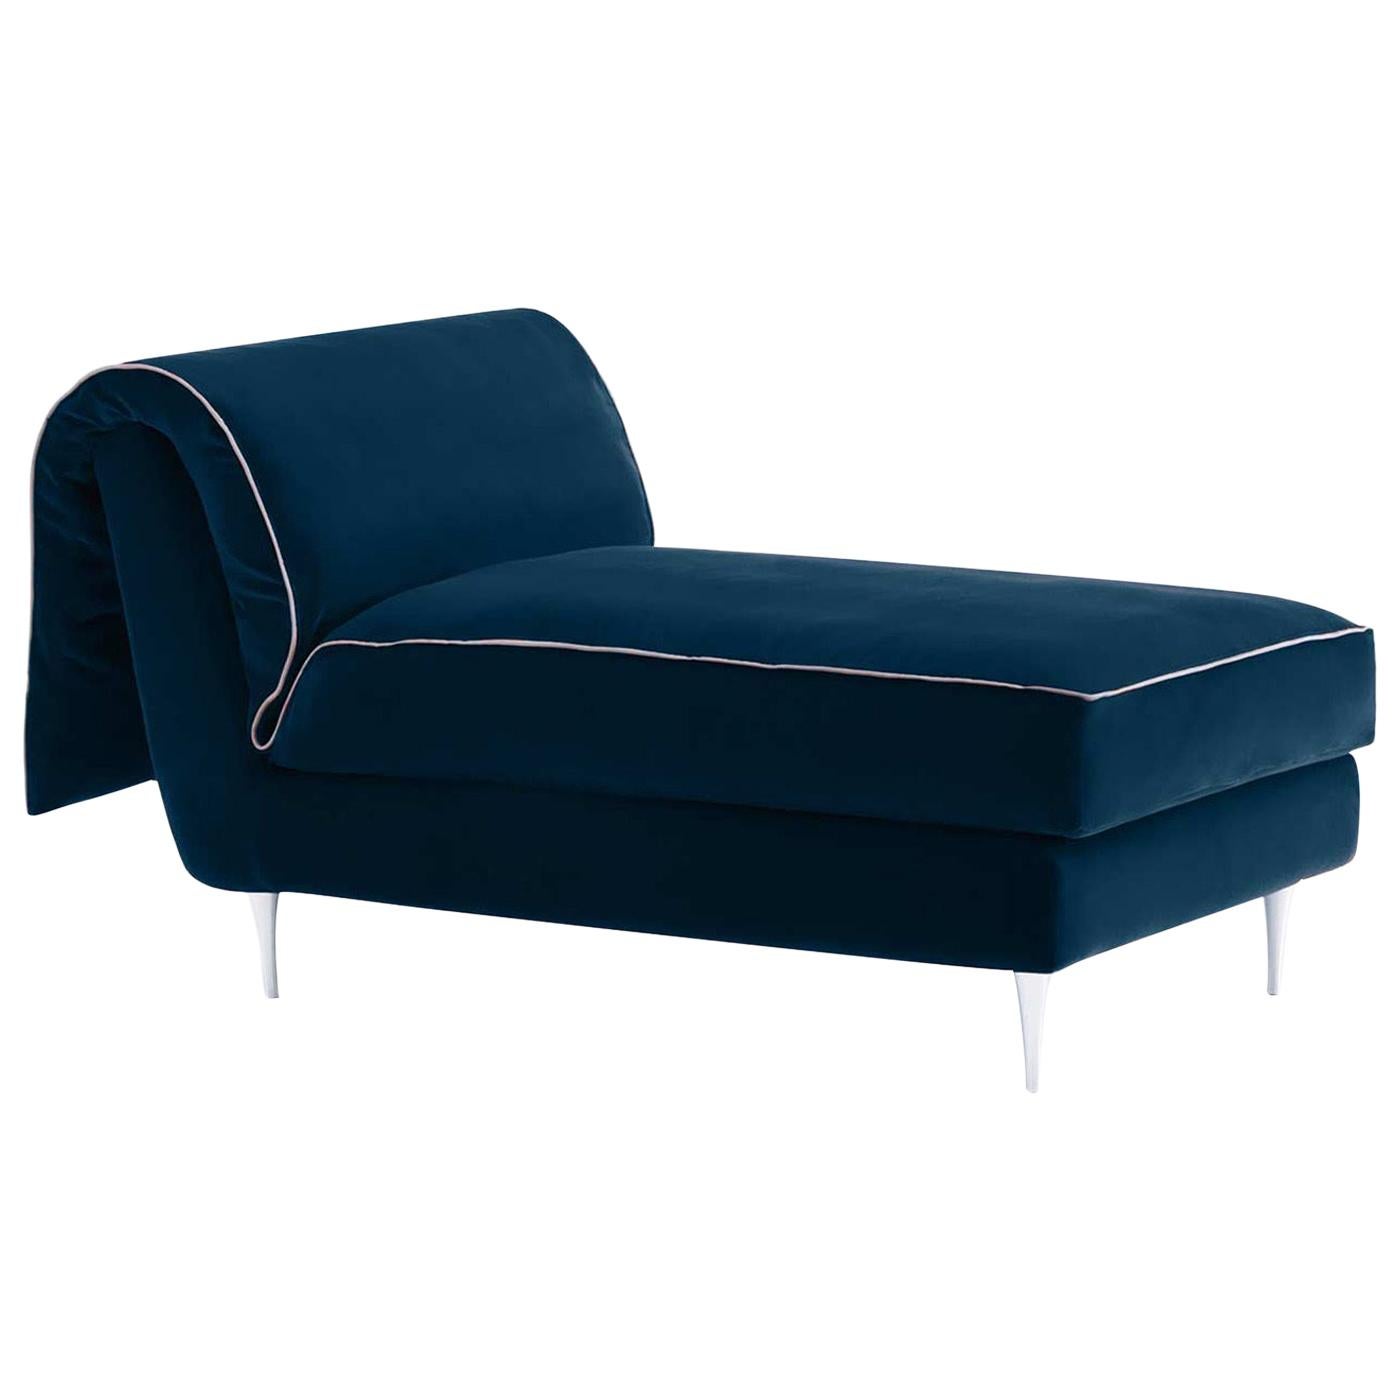 Casquet Bio Chaise Longue by DDP Studio For Sale at 1stDibs